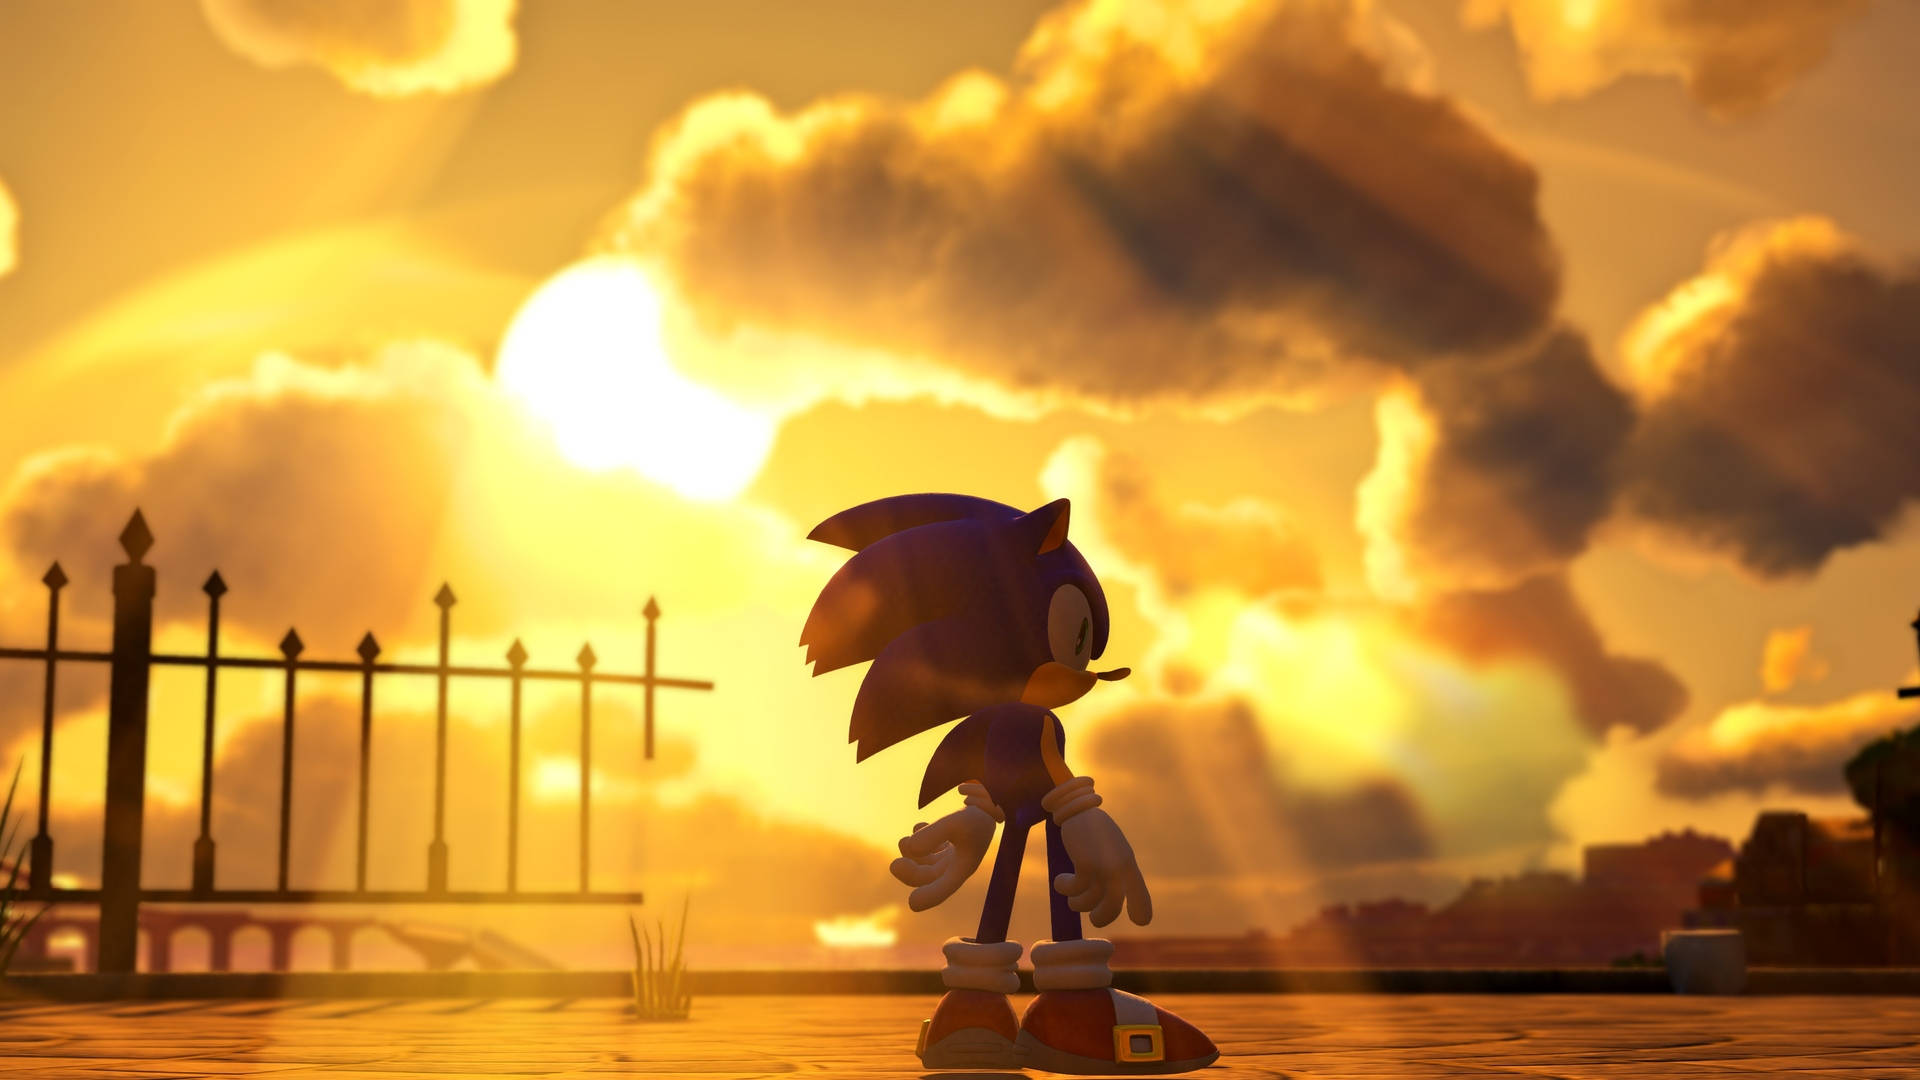 Download Sonic The Hedgehog By Sonic The Hedgehog Wallpaper  Wallpaperscom